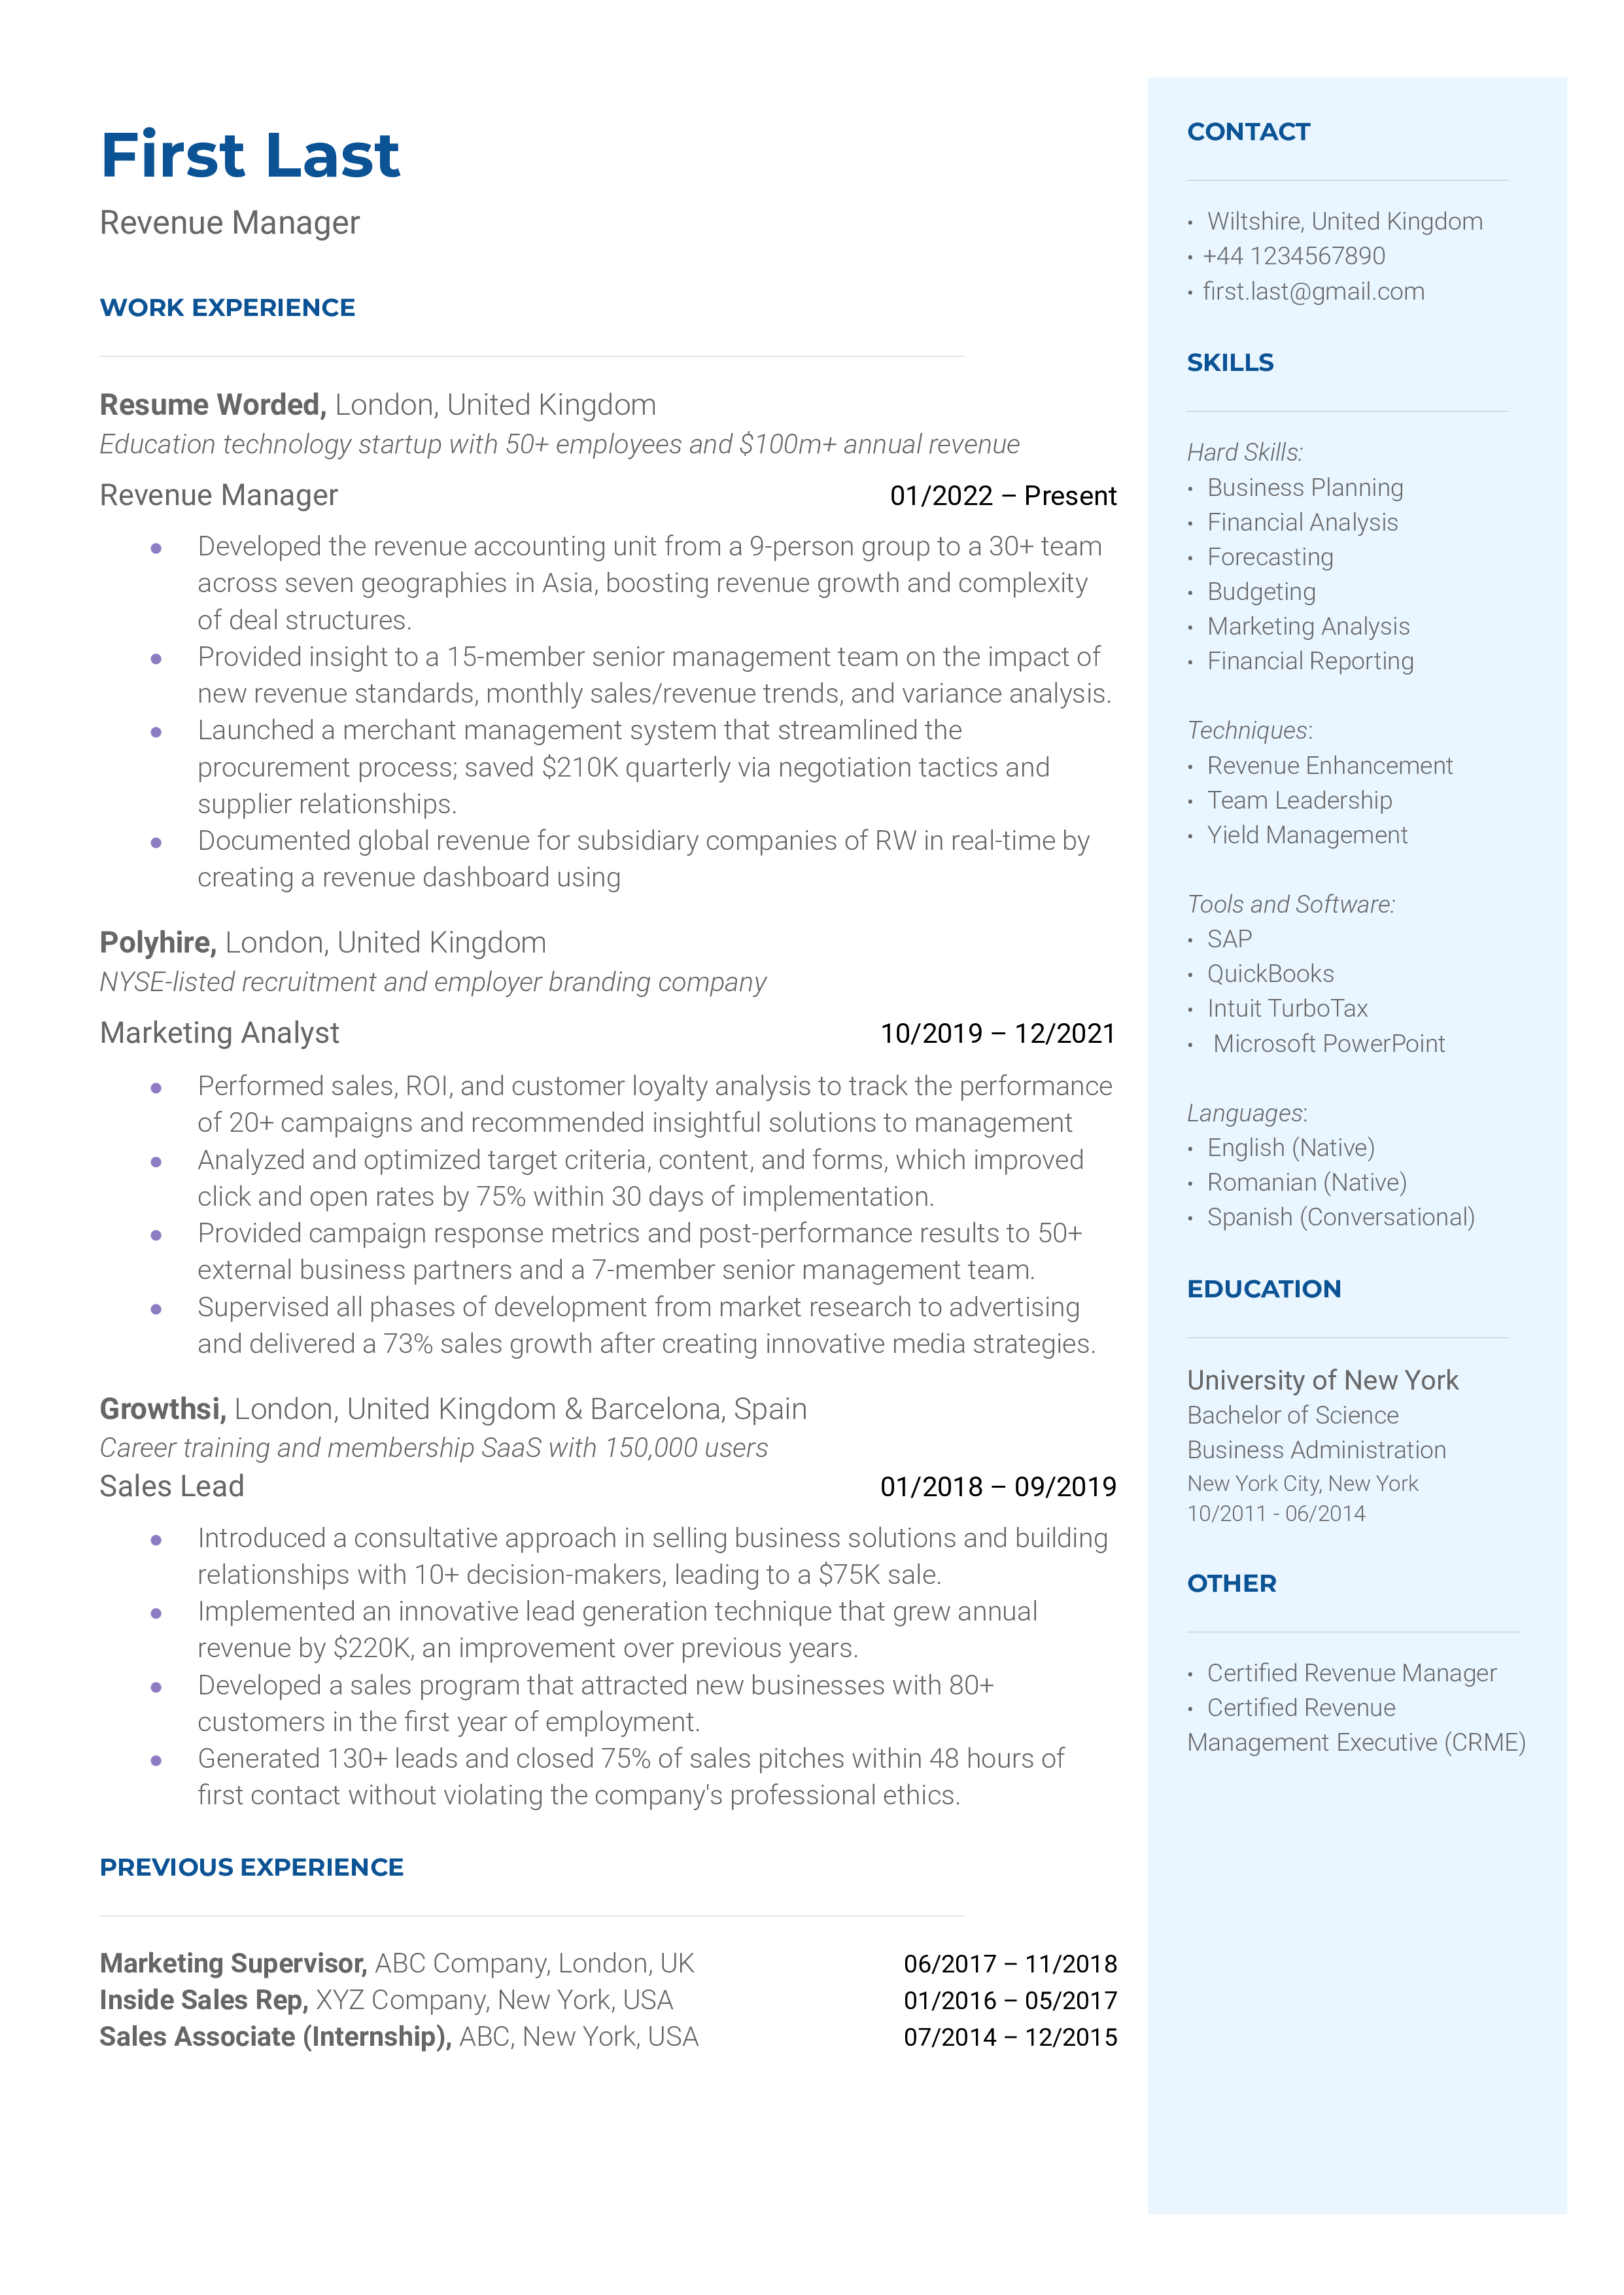 A revenue manager resume sample that highlights the candidate's certifications and skills.